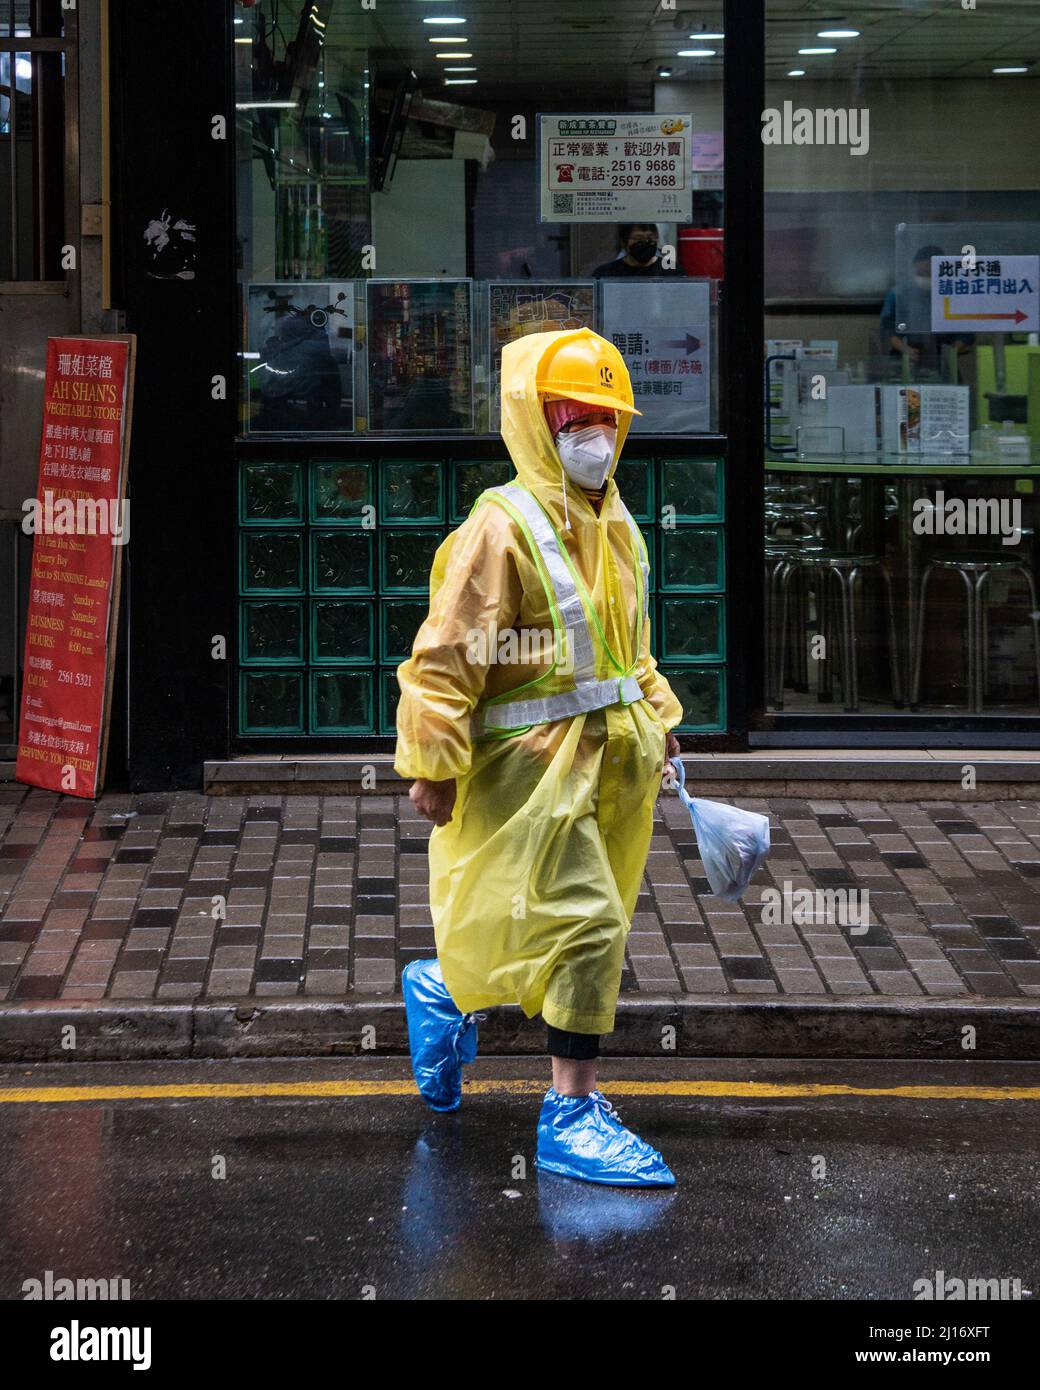 A worker in high-viz gear and a protective mask goes about their daily routine as a northern monsoon brings cooler weather and rain to Hong Kong. A rainy, spring day in Hong Kong. Stock Photo